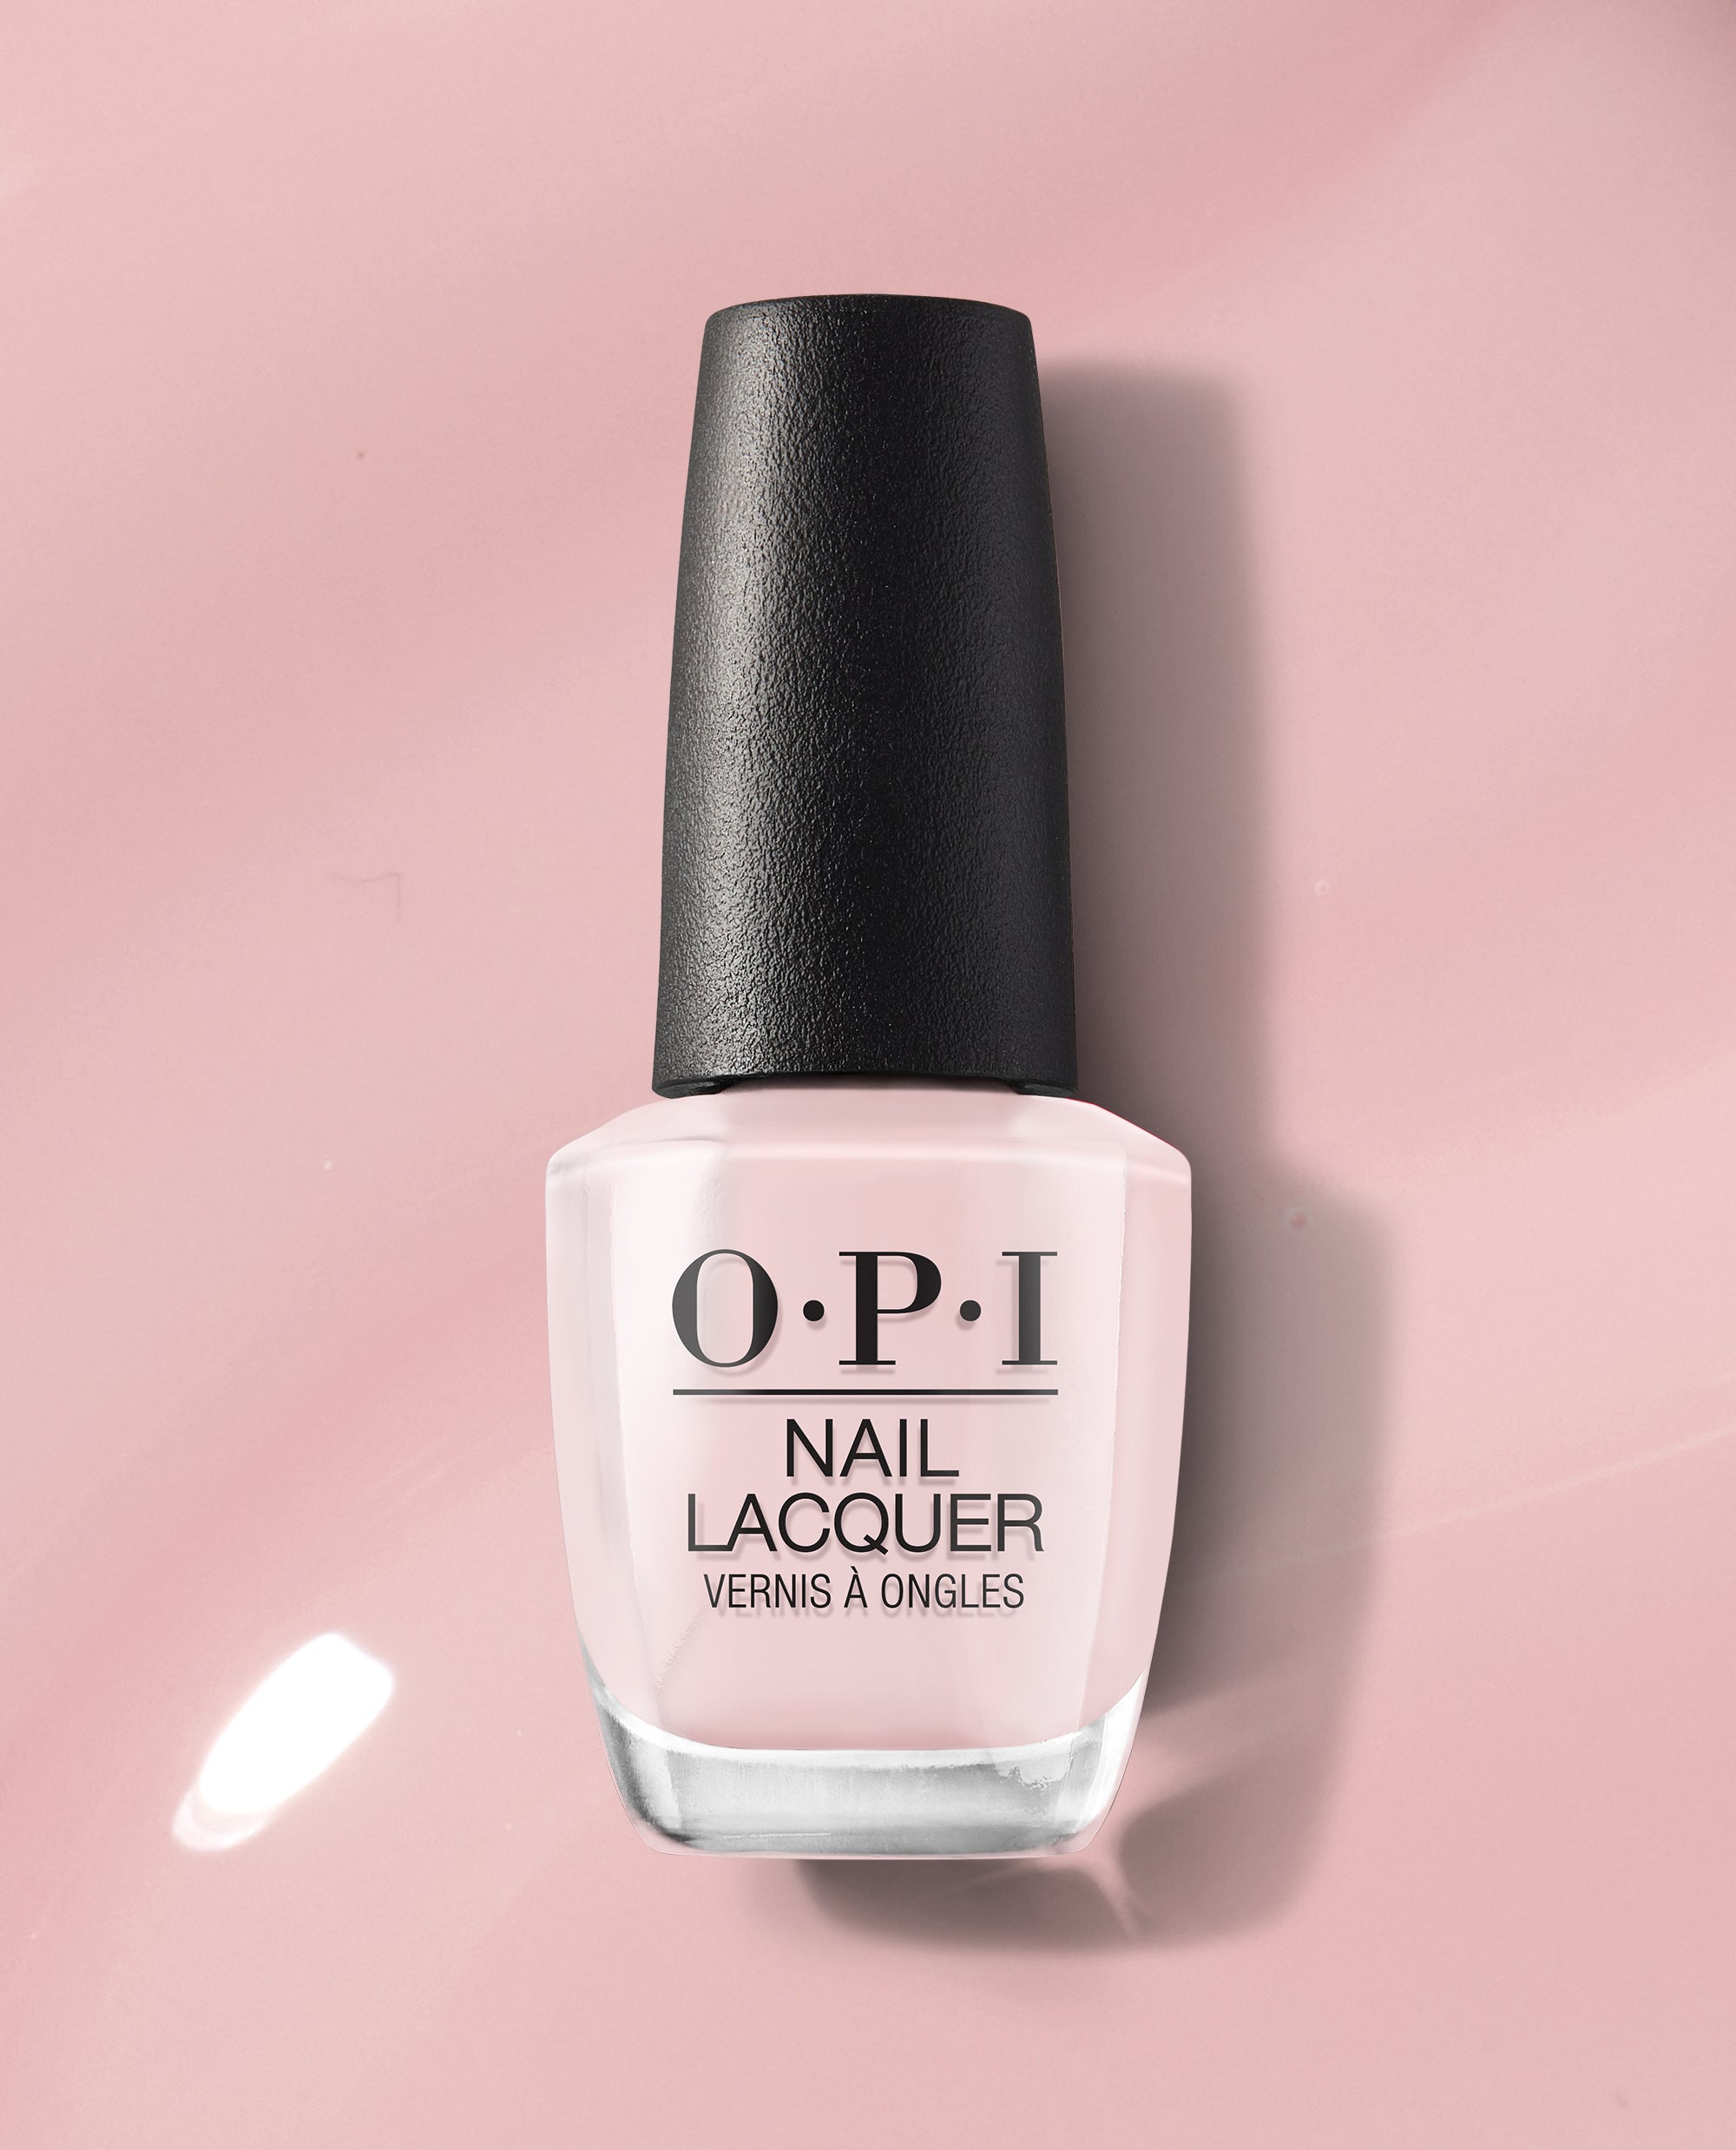 Pale Pink for Nails - The Blondissima